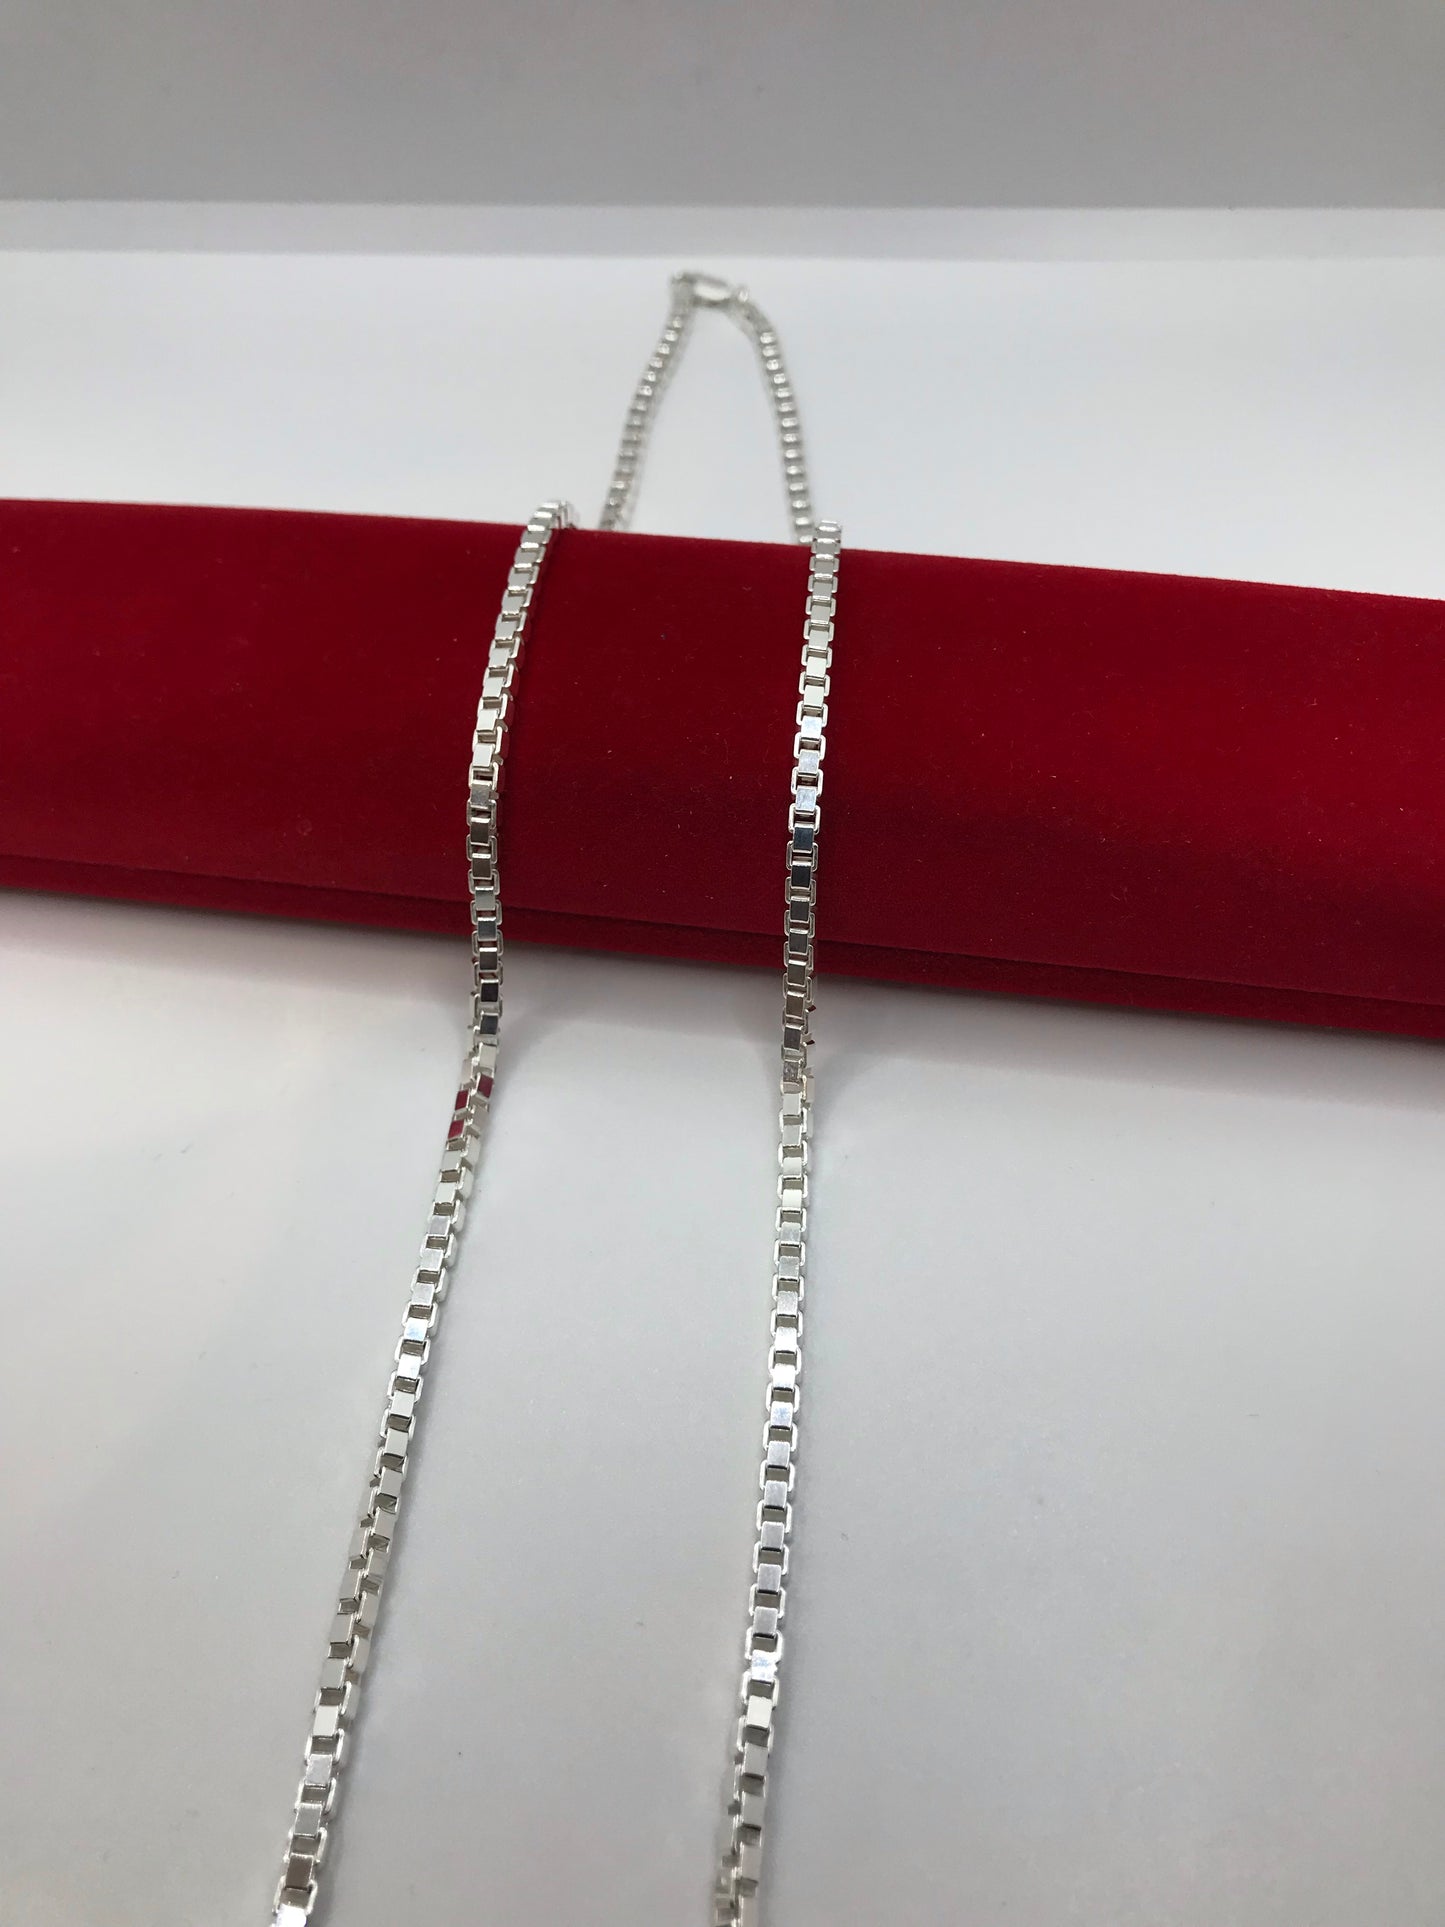 Real silver box chains